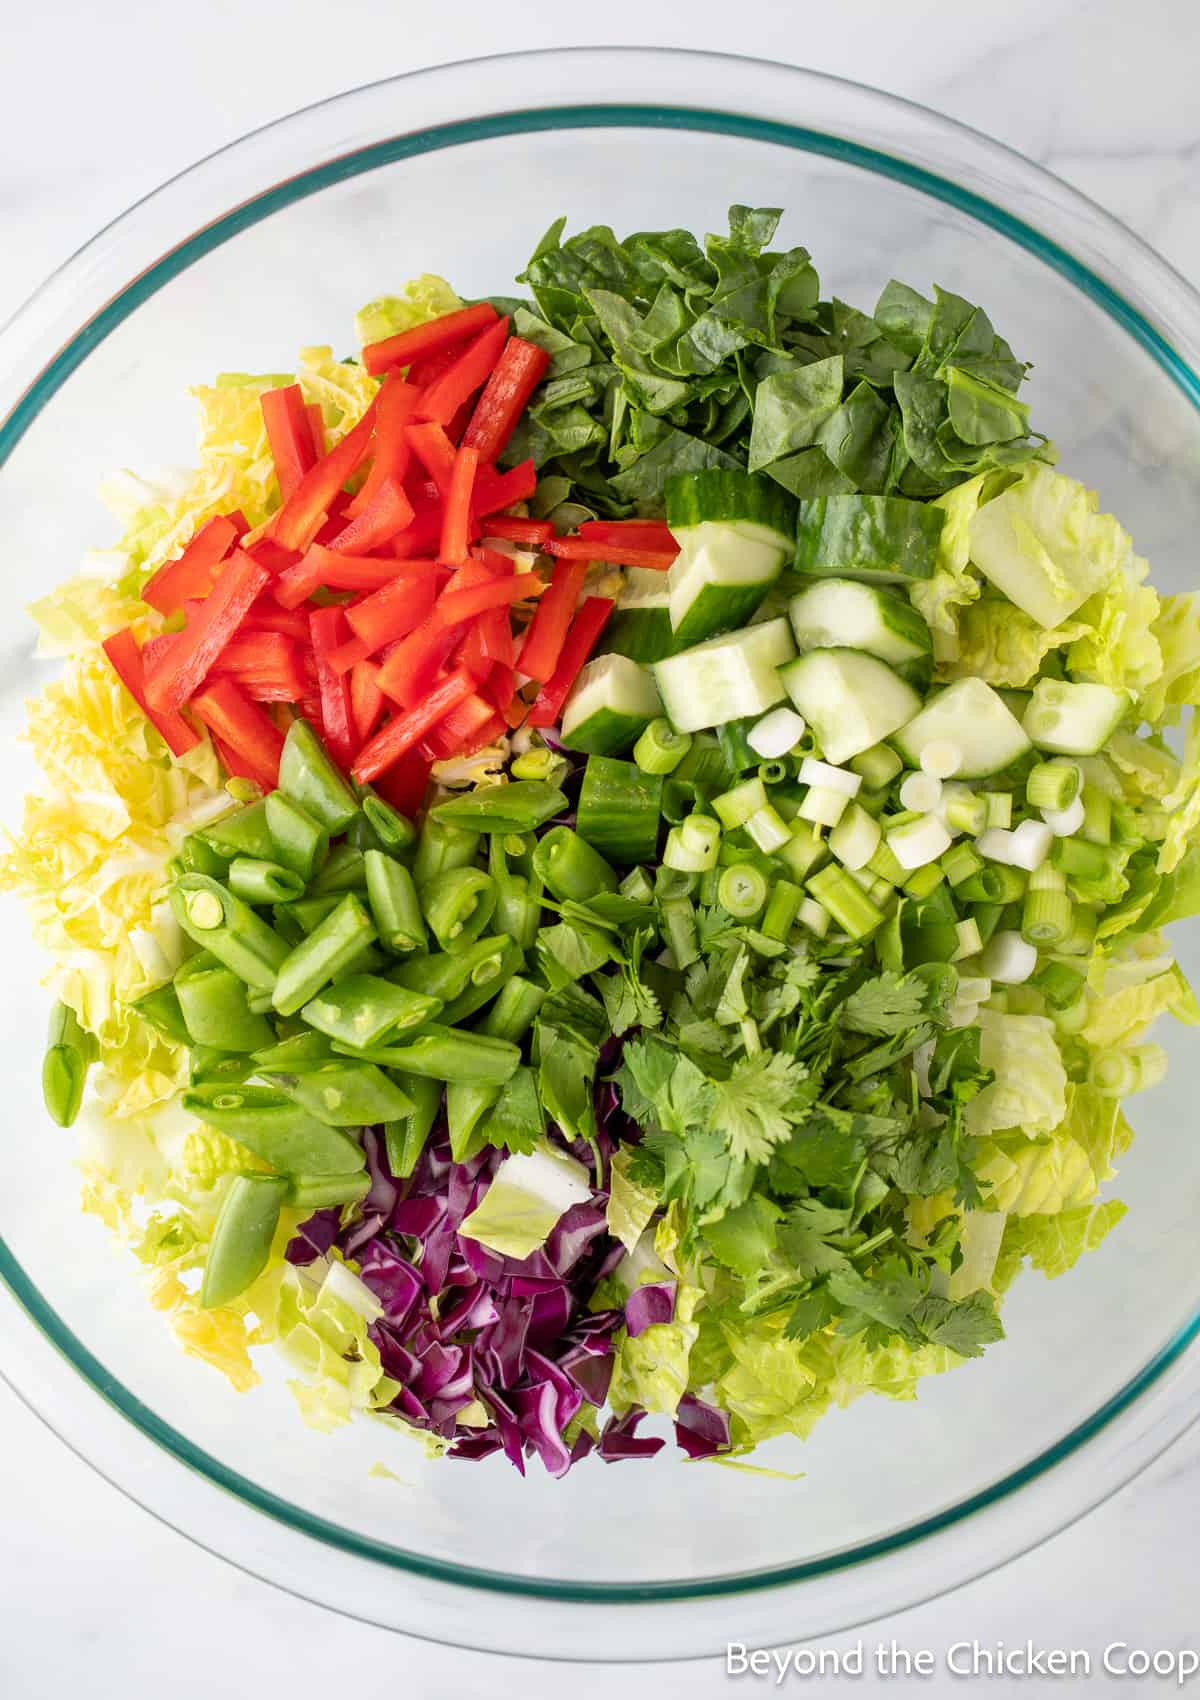 Lettuce and chopped veggies in a large bowl. 